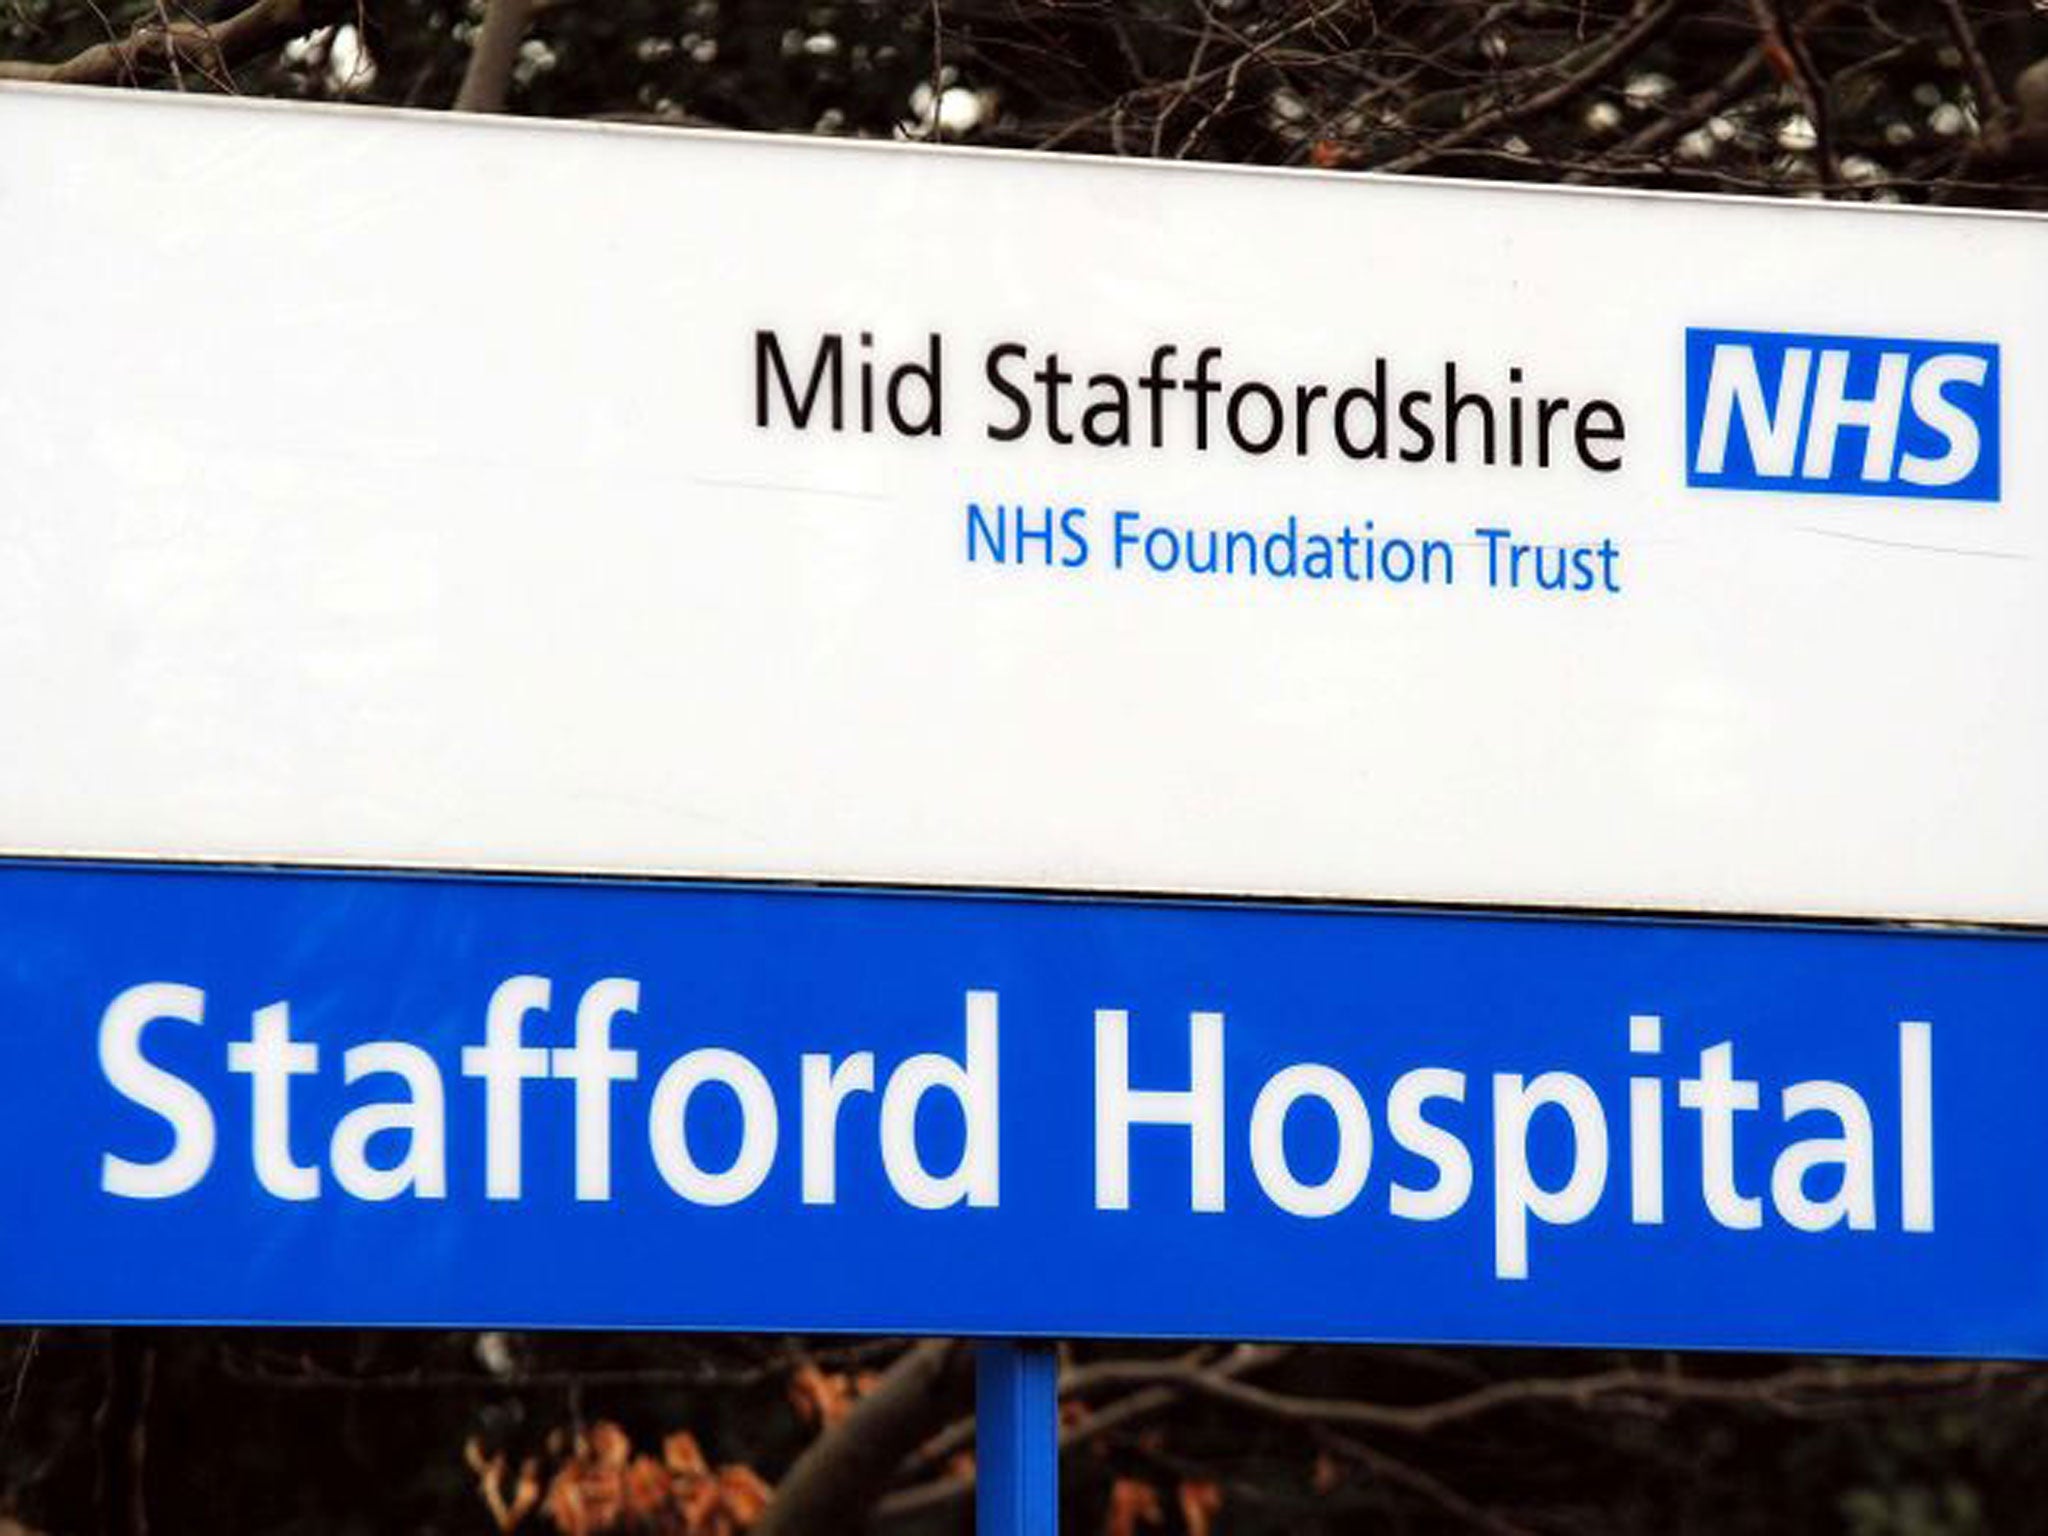 The NHS is at risk of further scandals similar to that at Mid-Staffordshire unless the Government fully implements the recommendations of the Francis Inquiry